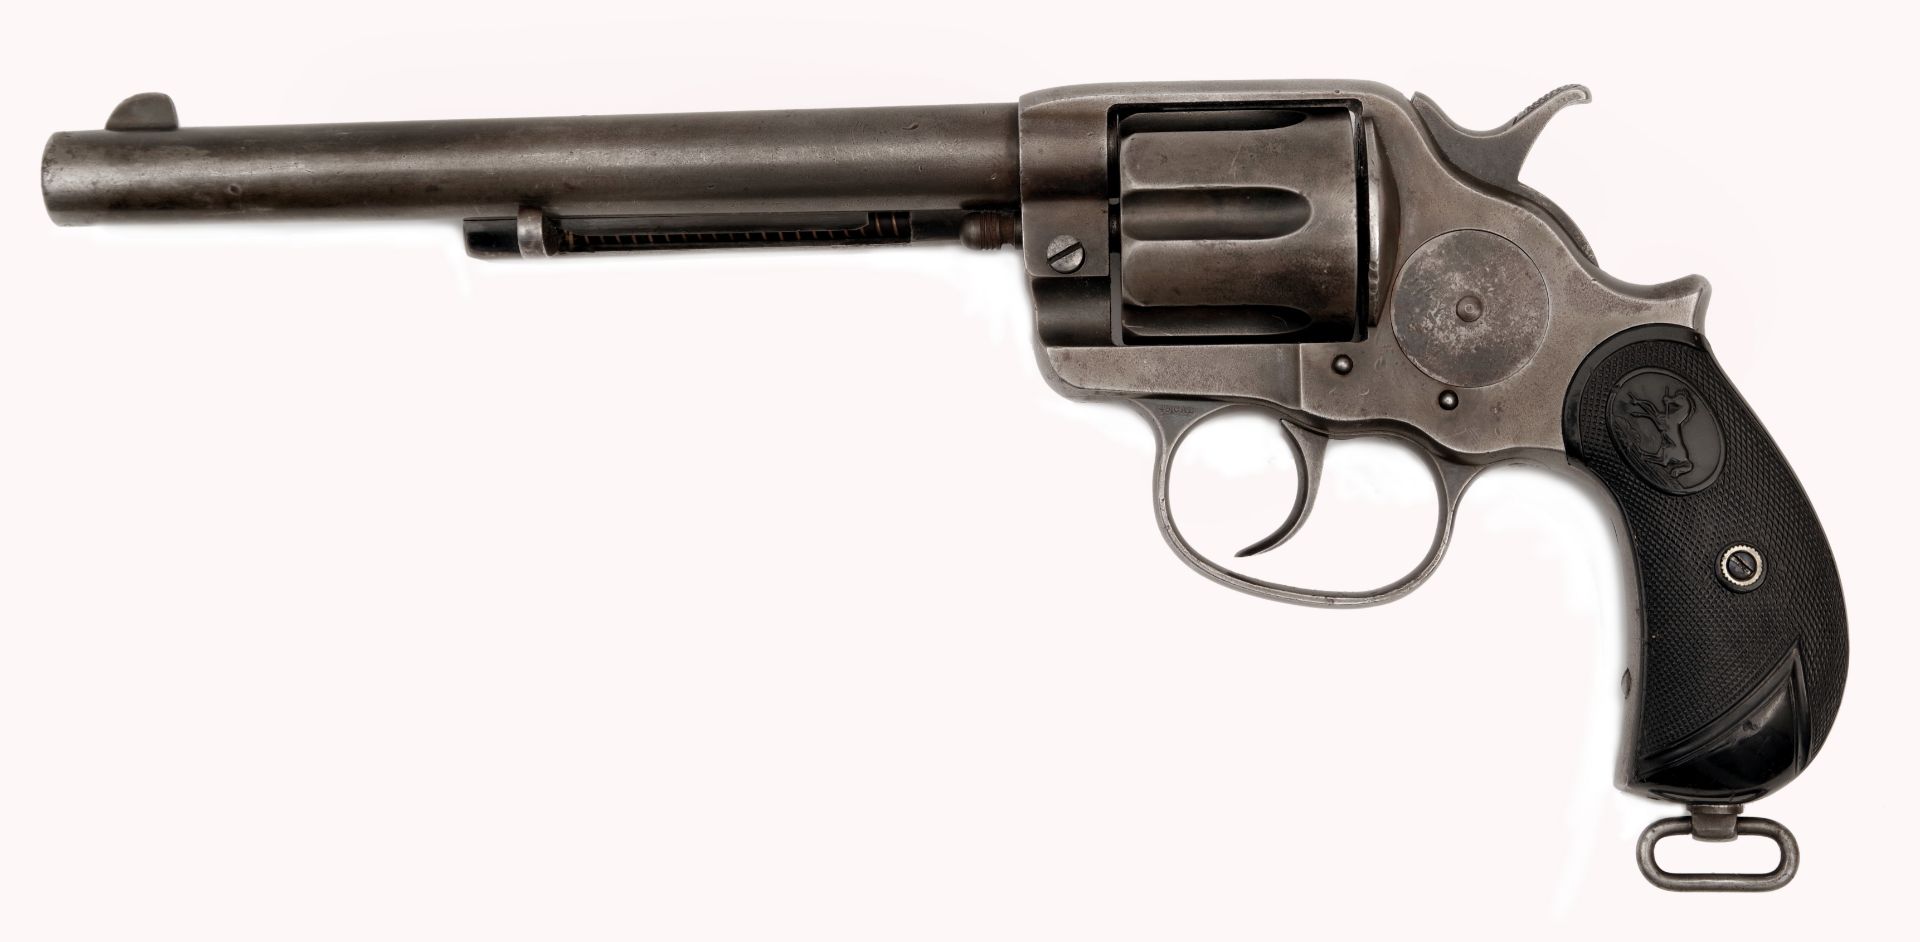 Colt Model 1878 Double Action Revolver - Image 2 of 5